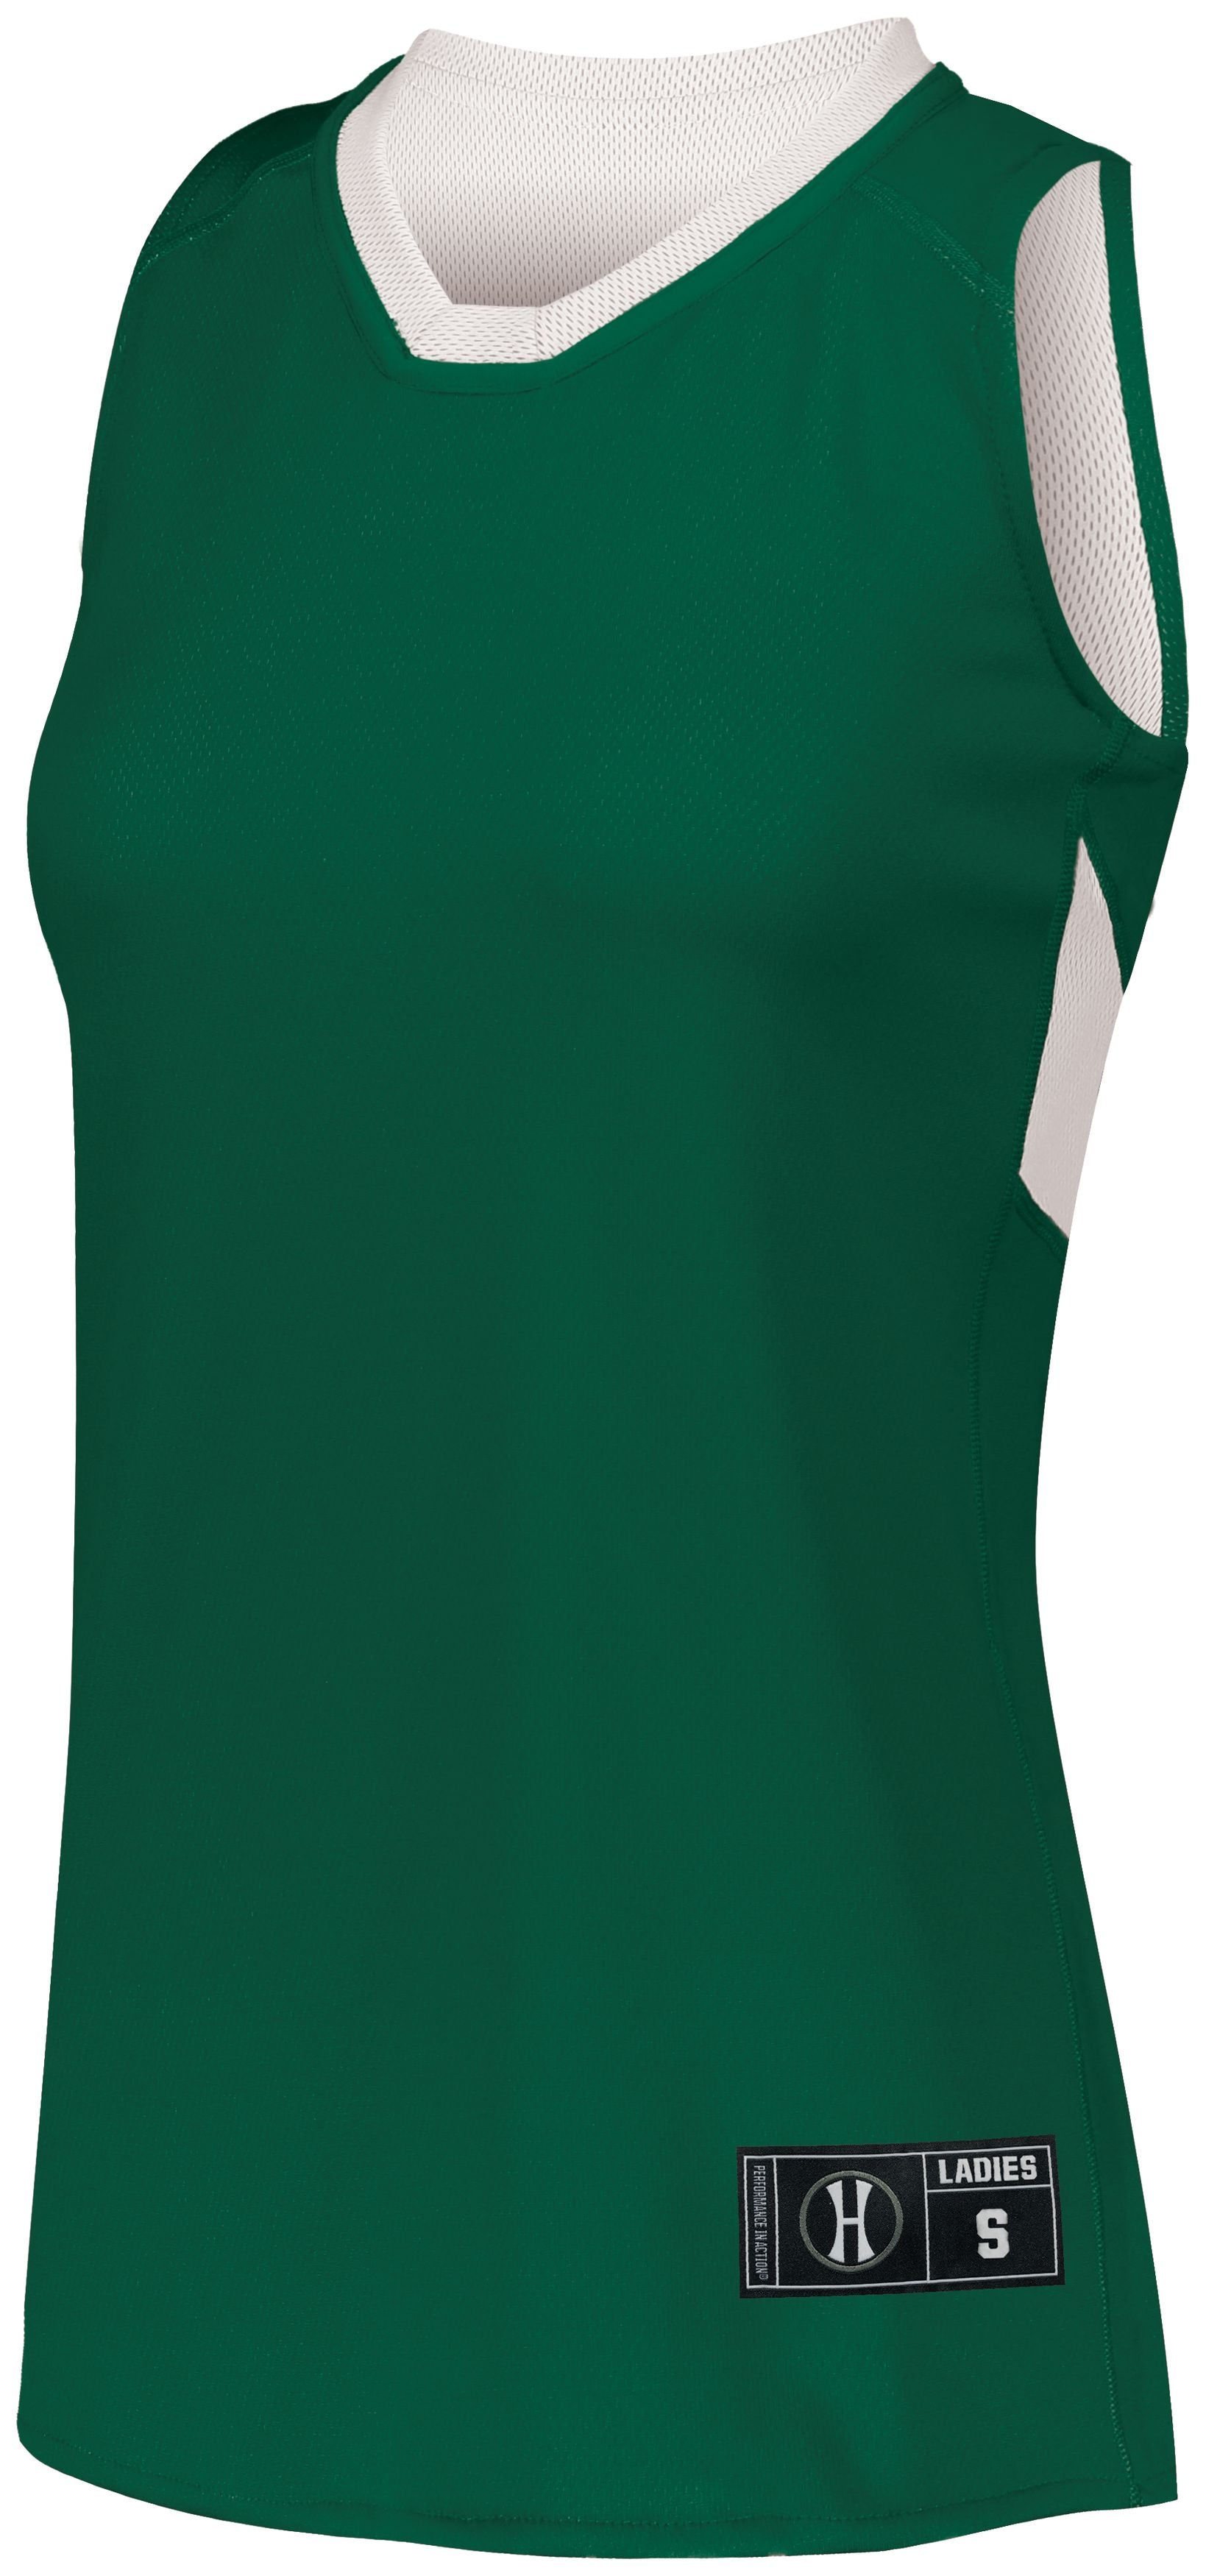 Holloway Ladies Dual-Side Single Ply Basketball Jersey in Forest/White  -Part of the Ladies, Ladies-Jersey, Basketball, Holloway, Shirts, All-Sports, All-Sports-1 product lines at KanaleyCreations.com